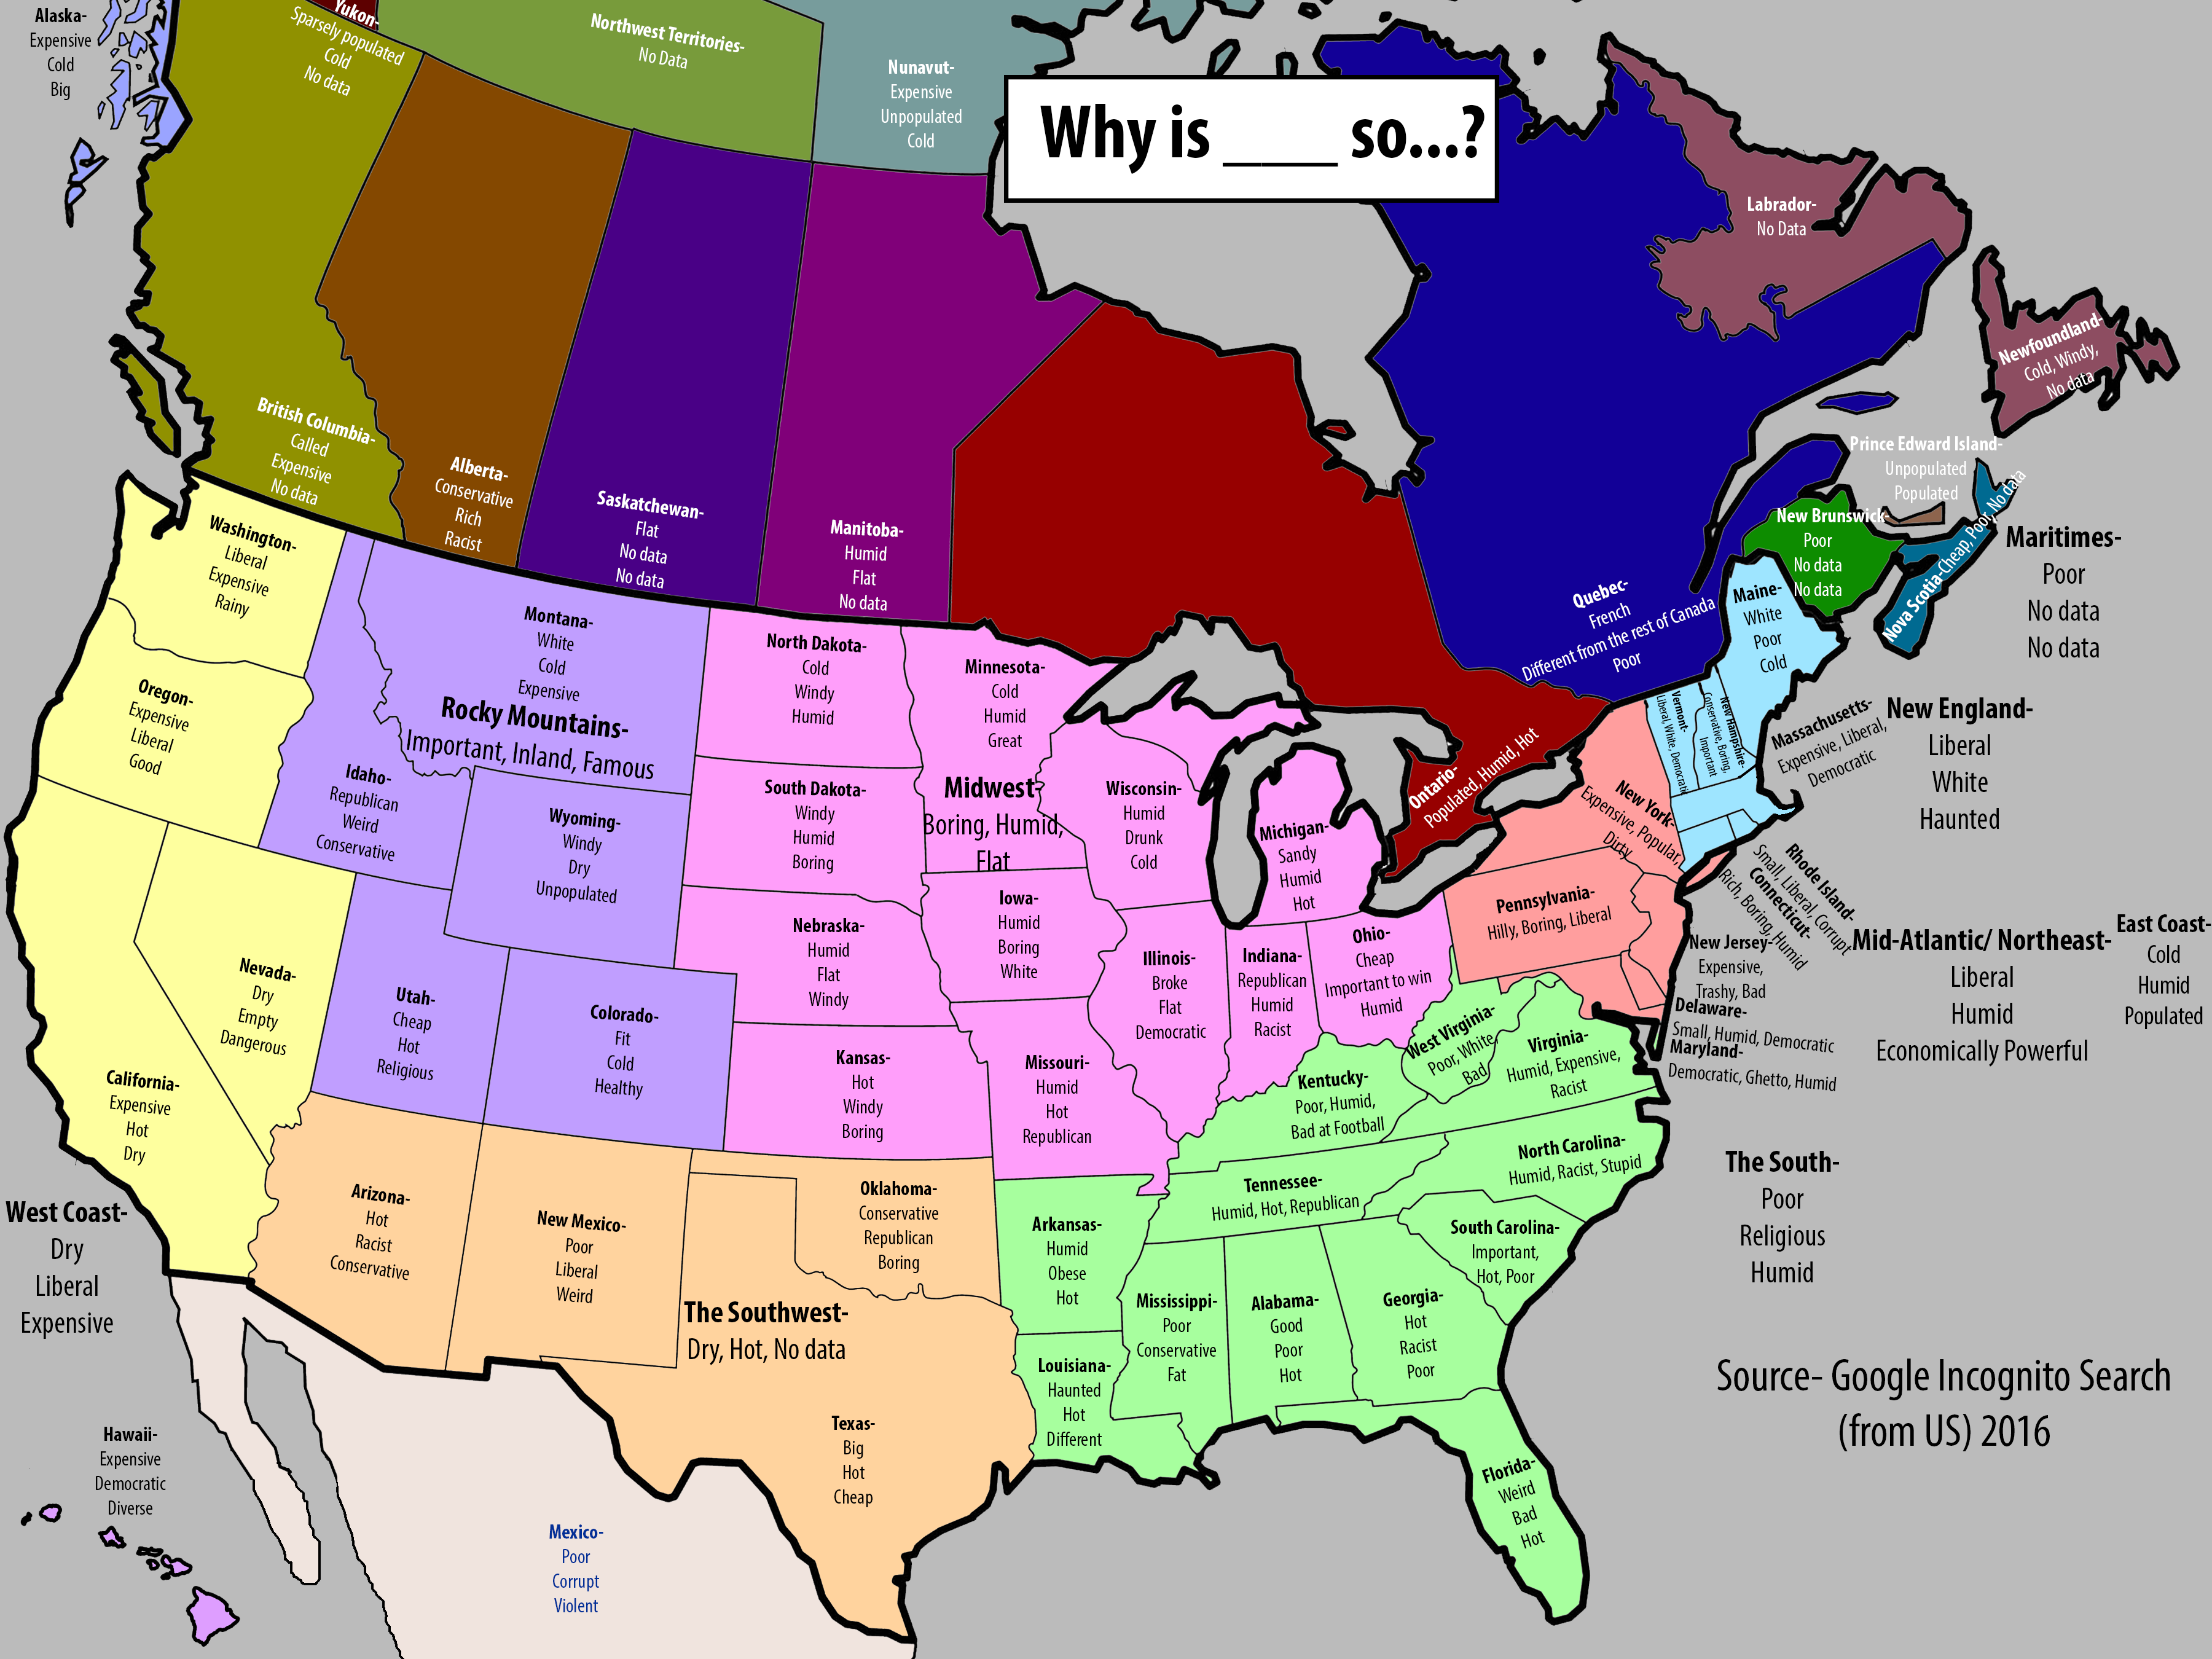 Map of top 3 autocomplete searches for "Why is ___ so..." in each state, province, region, and territory in the US & Canada + Mexico